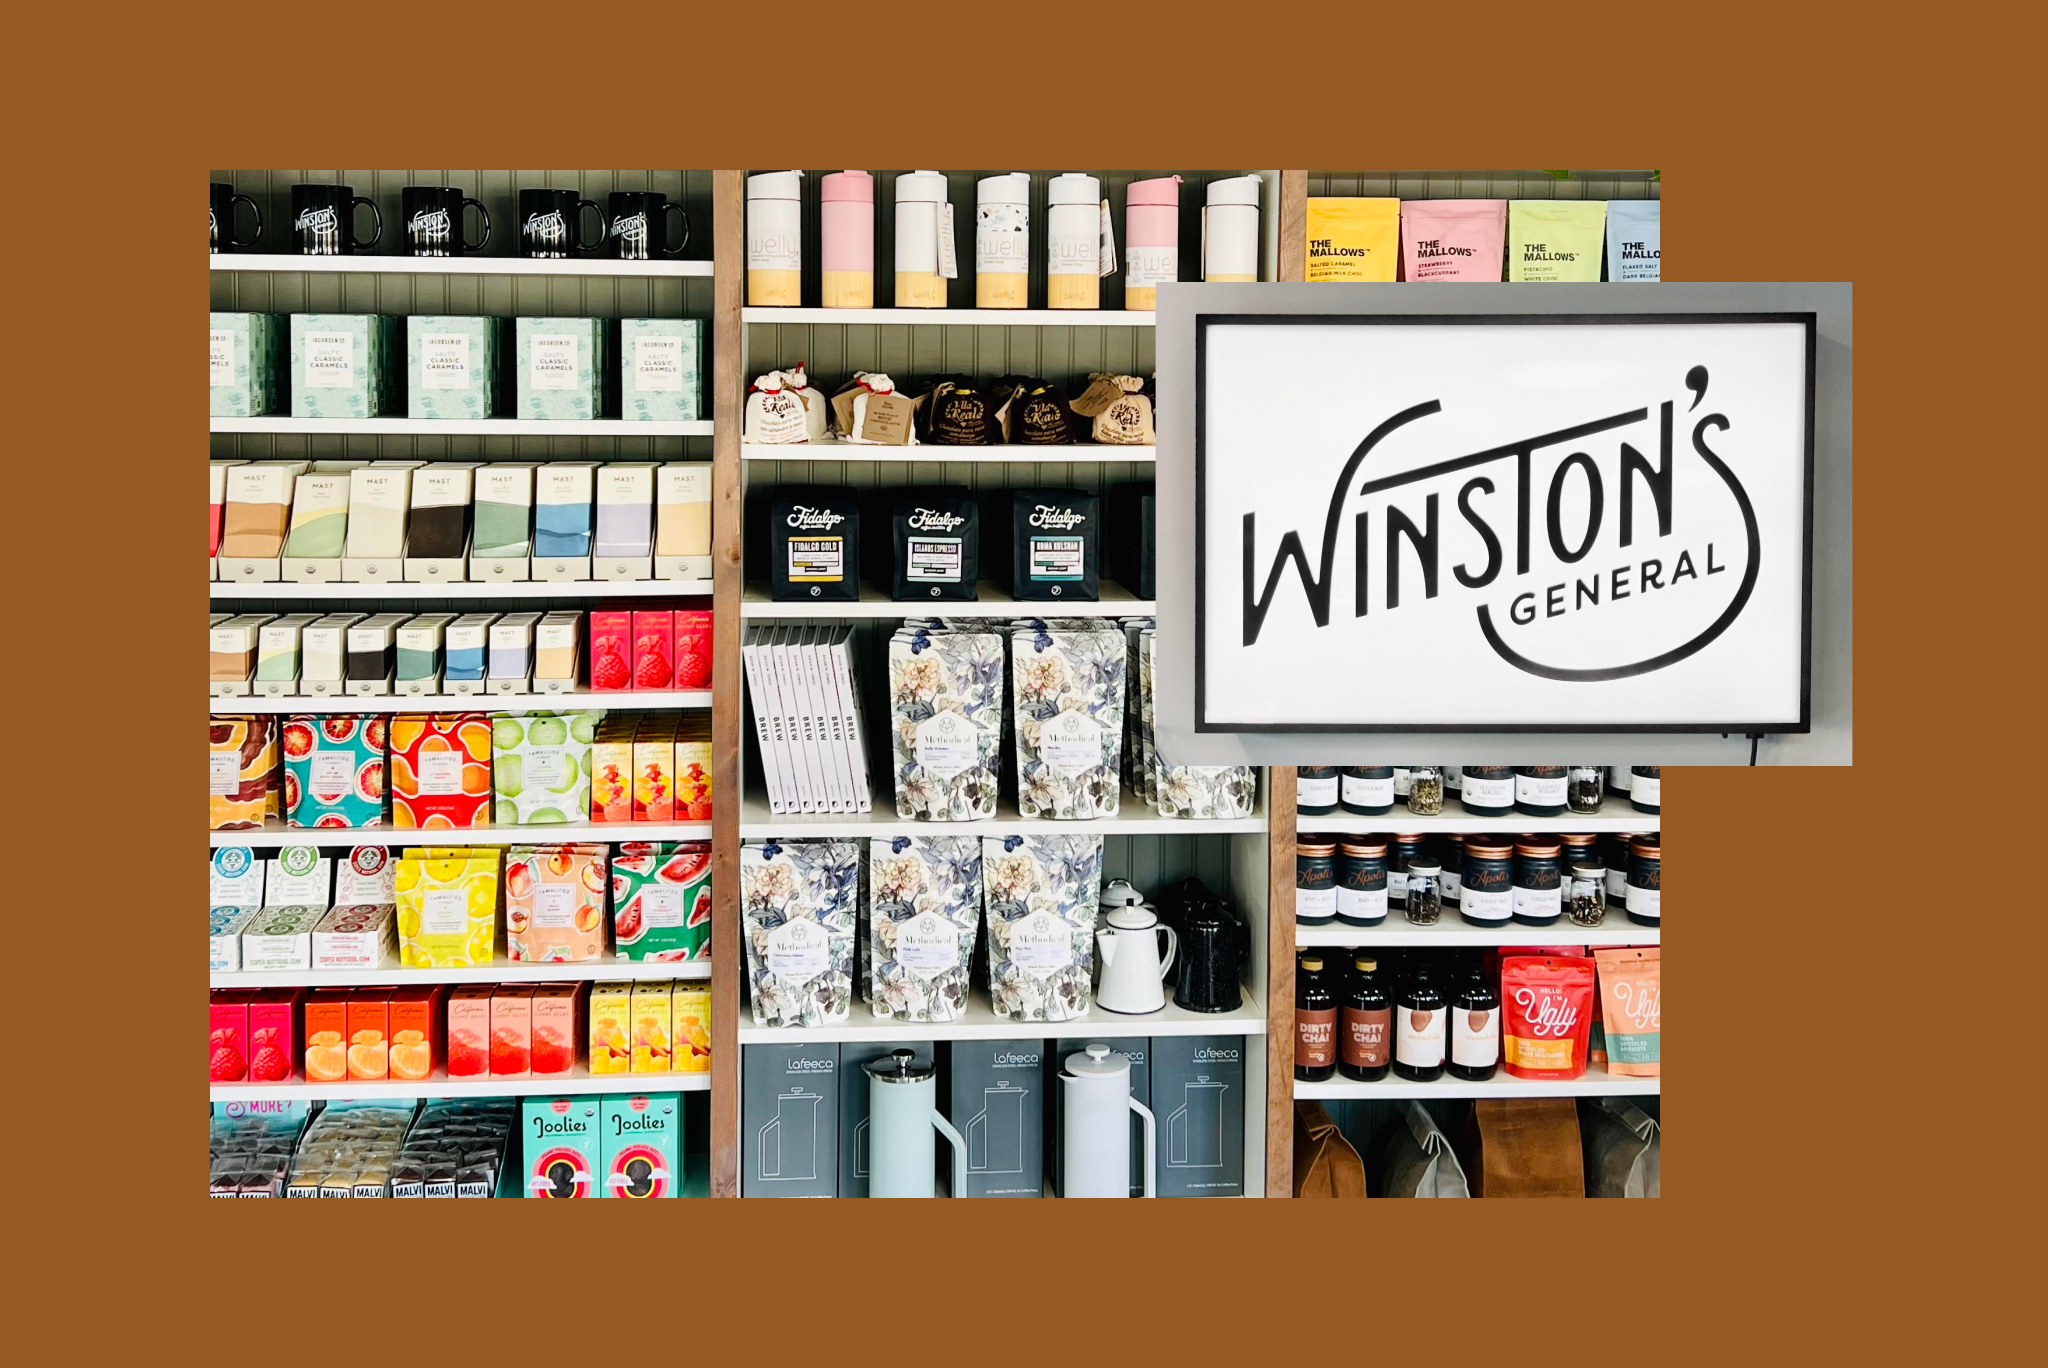 The shelves and logo for Winston's General, a specialty goods store in La Conner, Washington